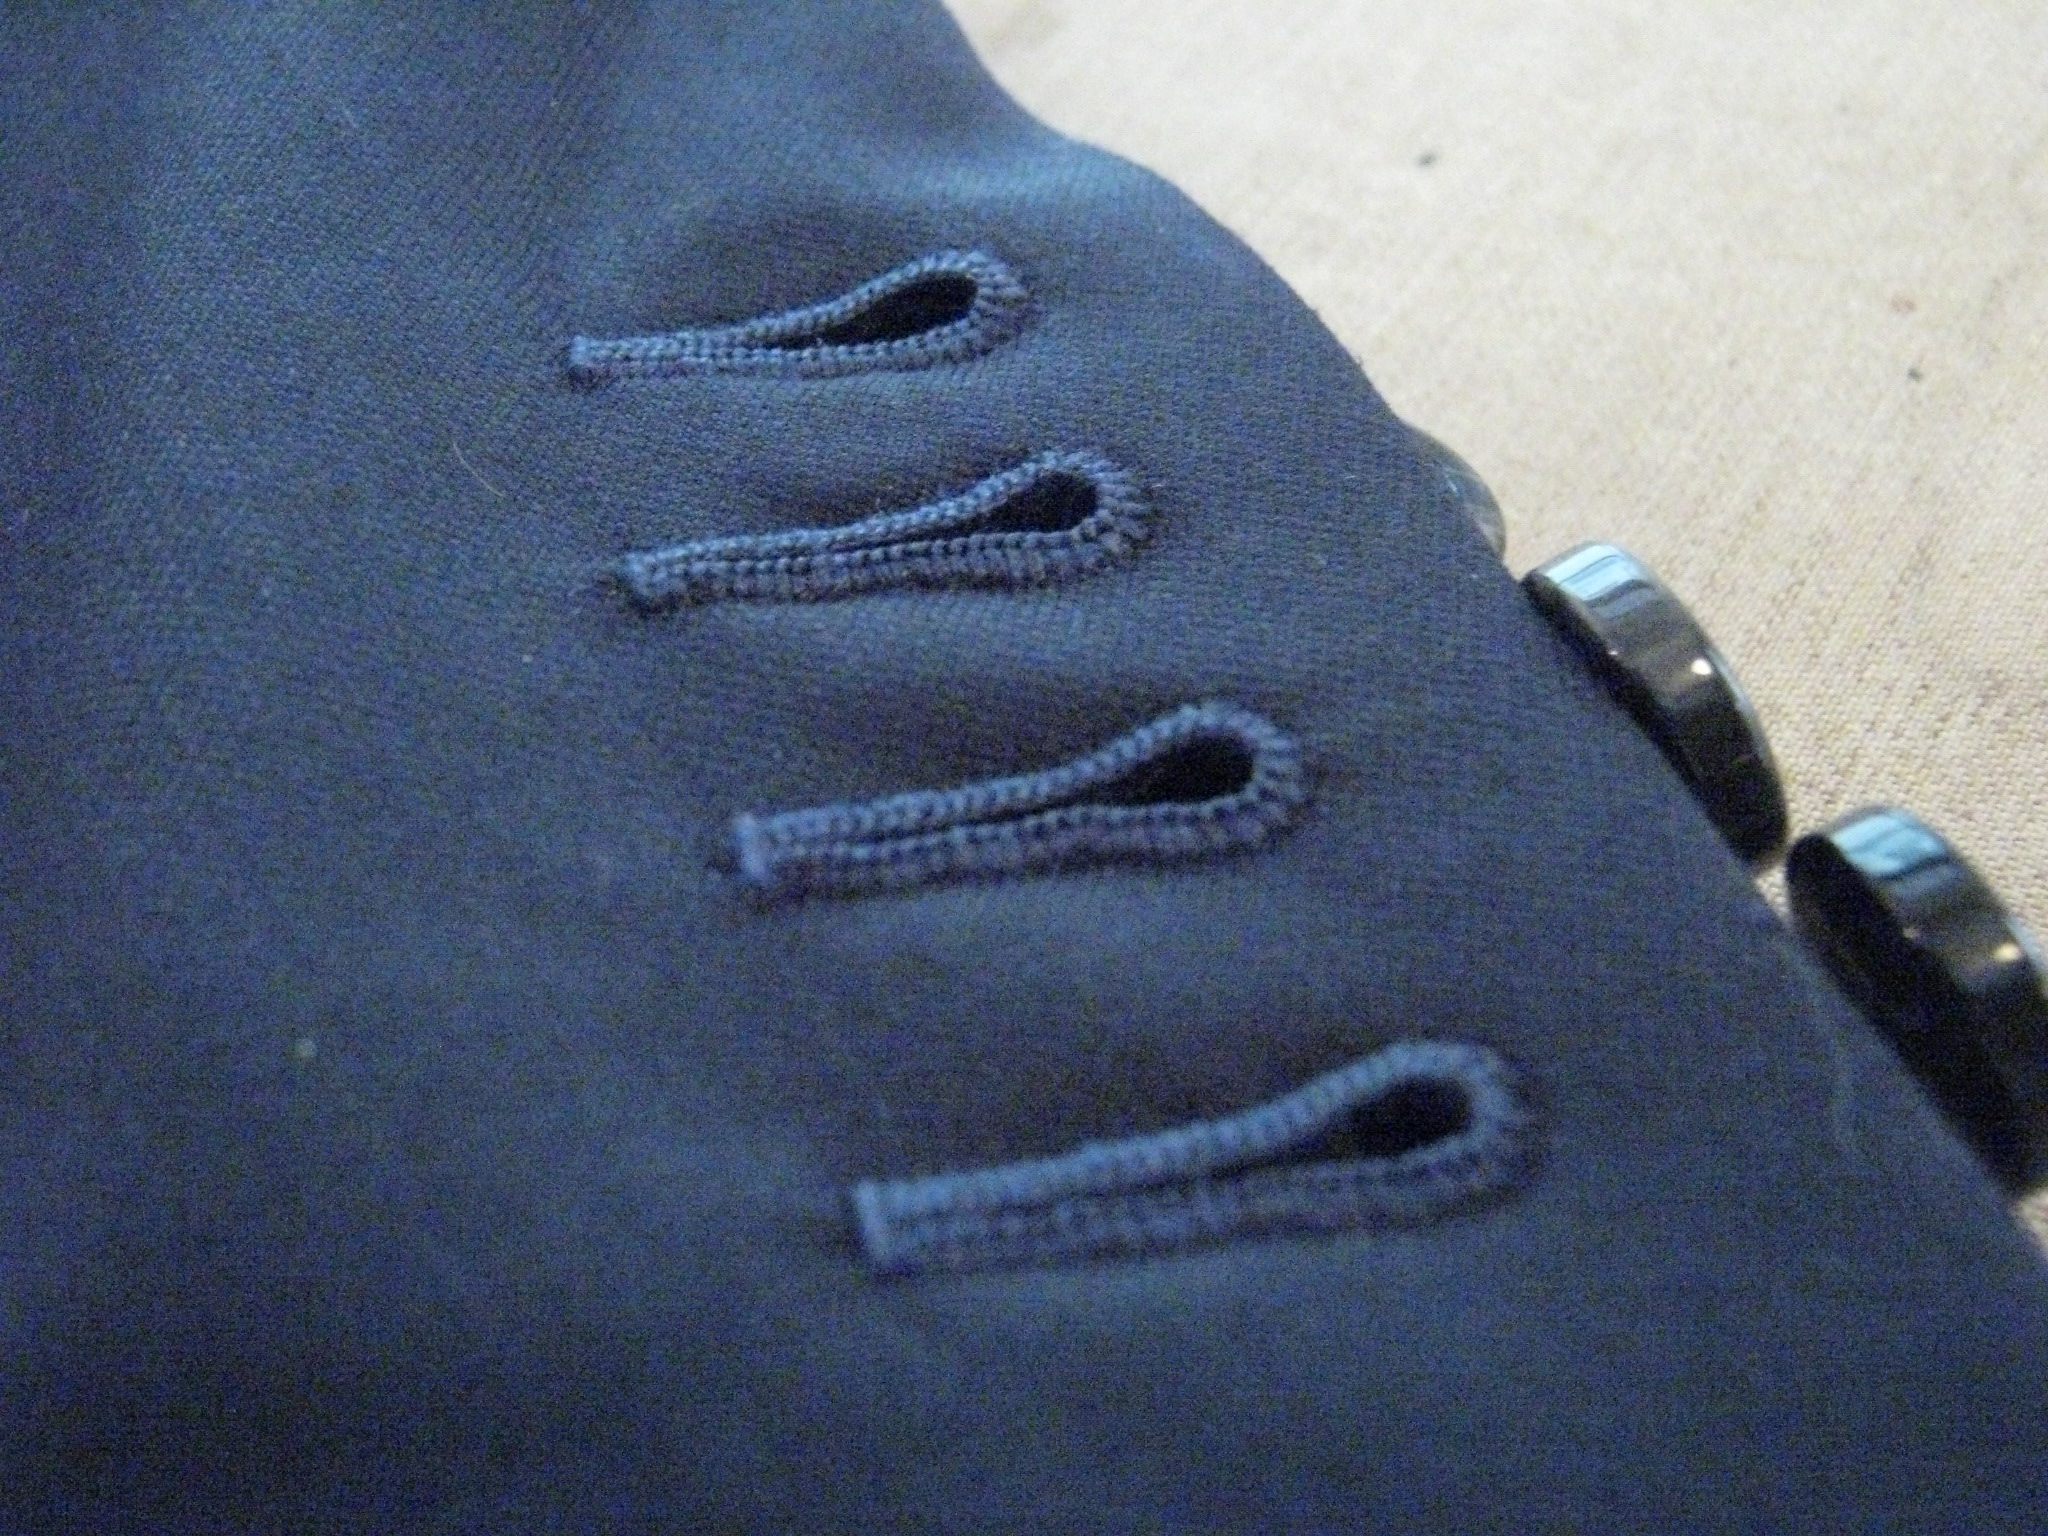 The Hand Sewn Buttonhole Thread | Page 2 | Styleforum